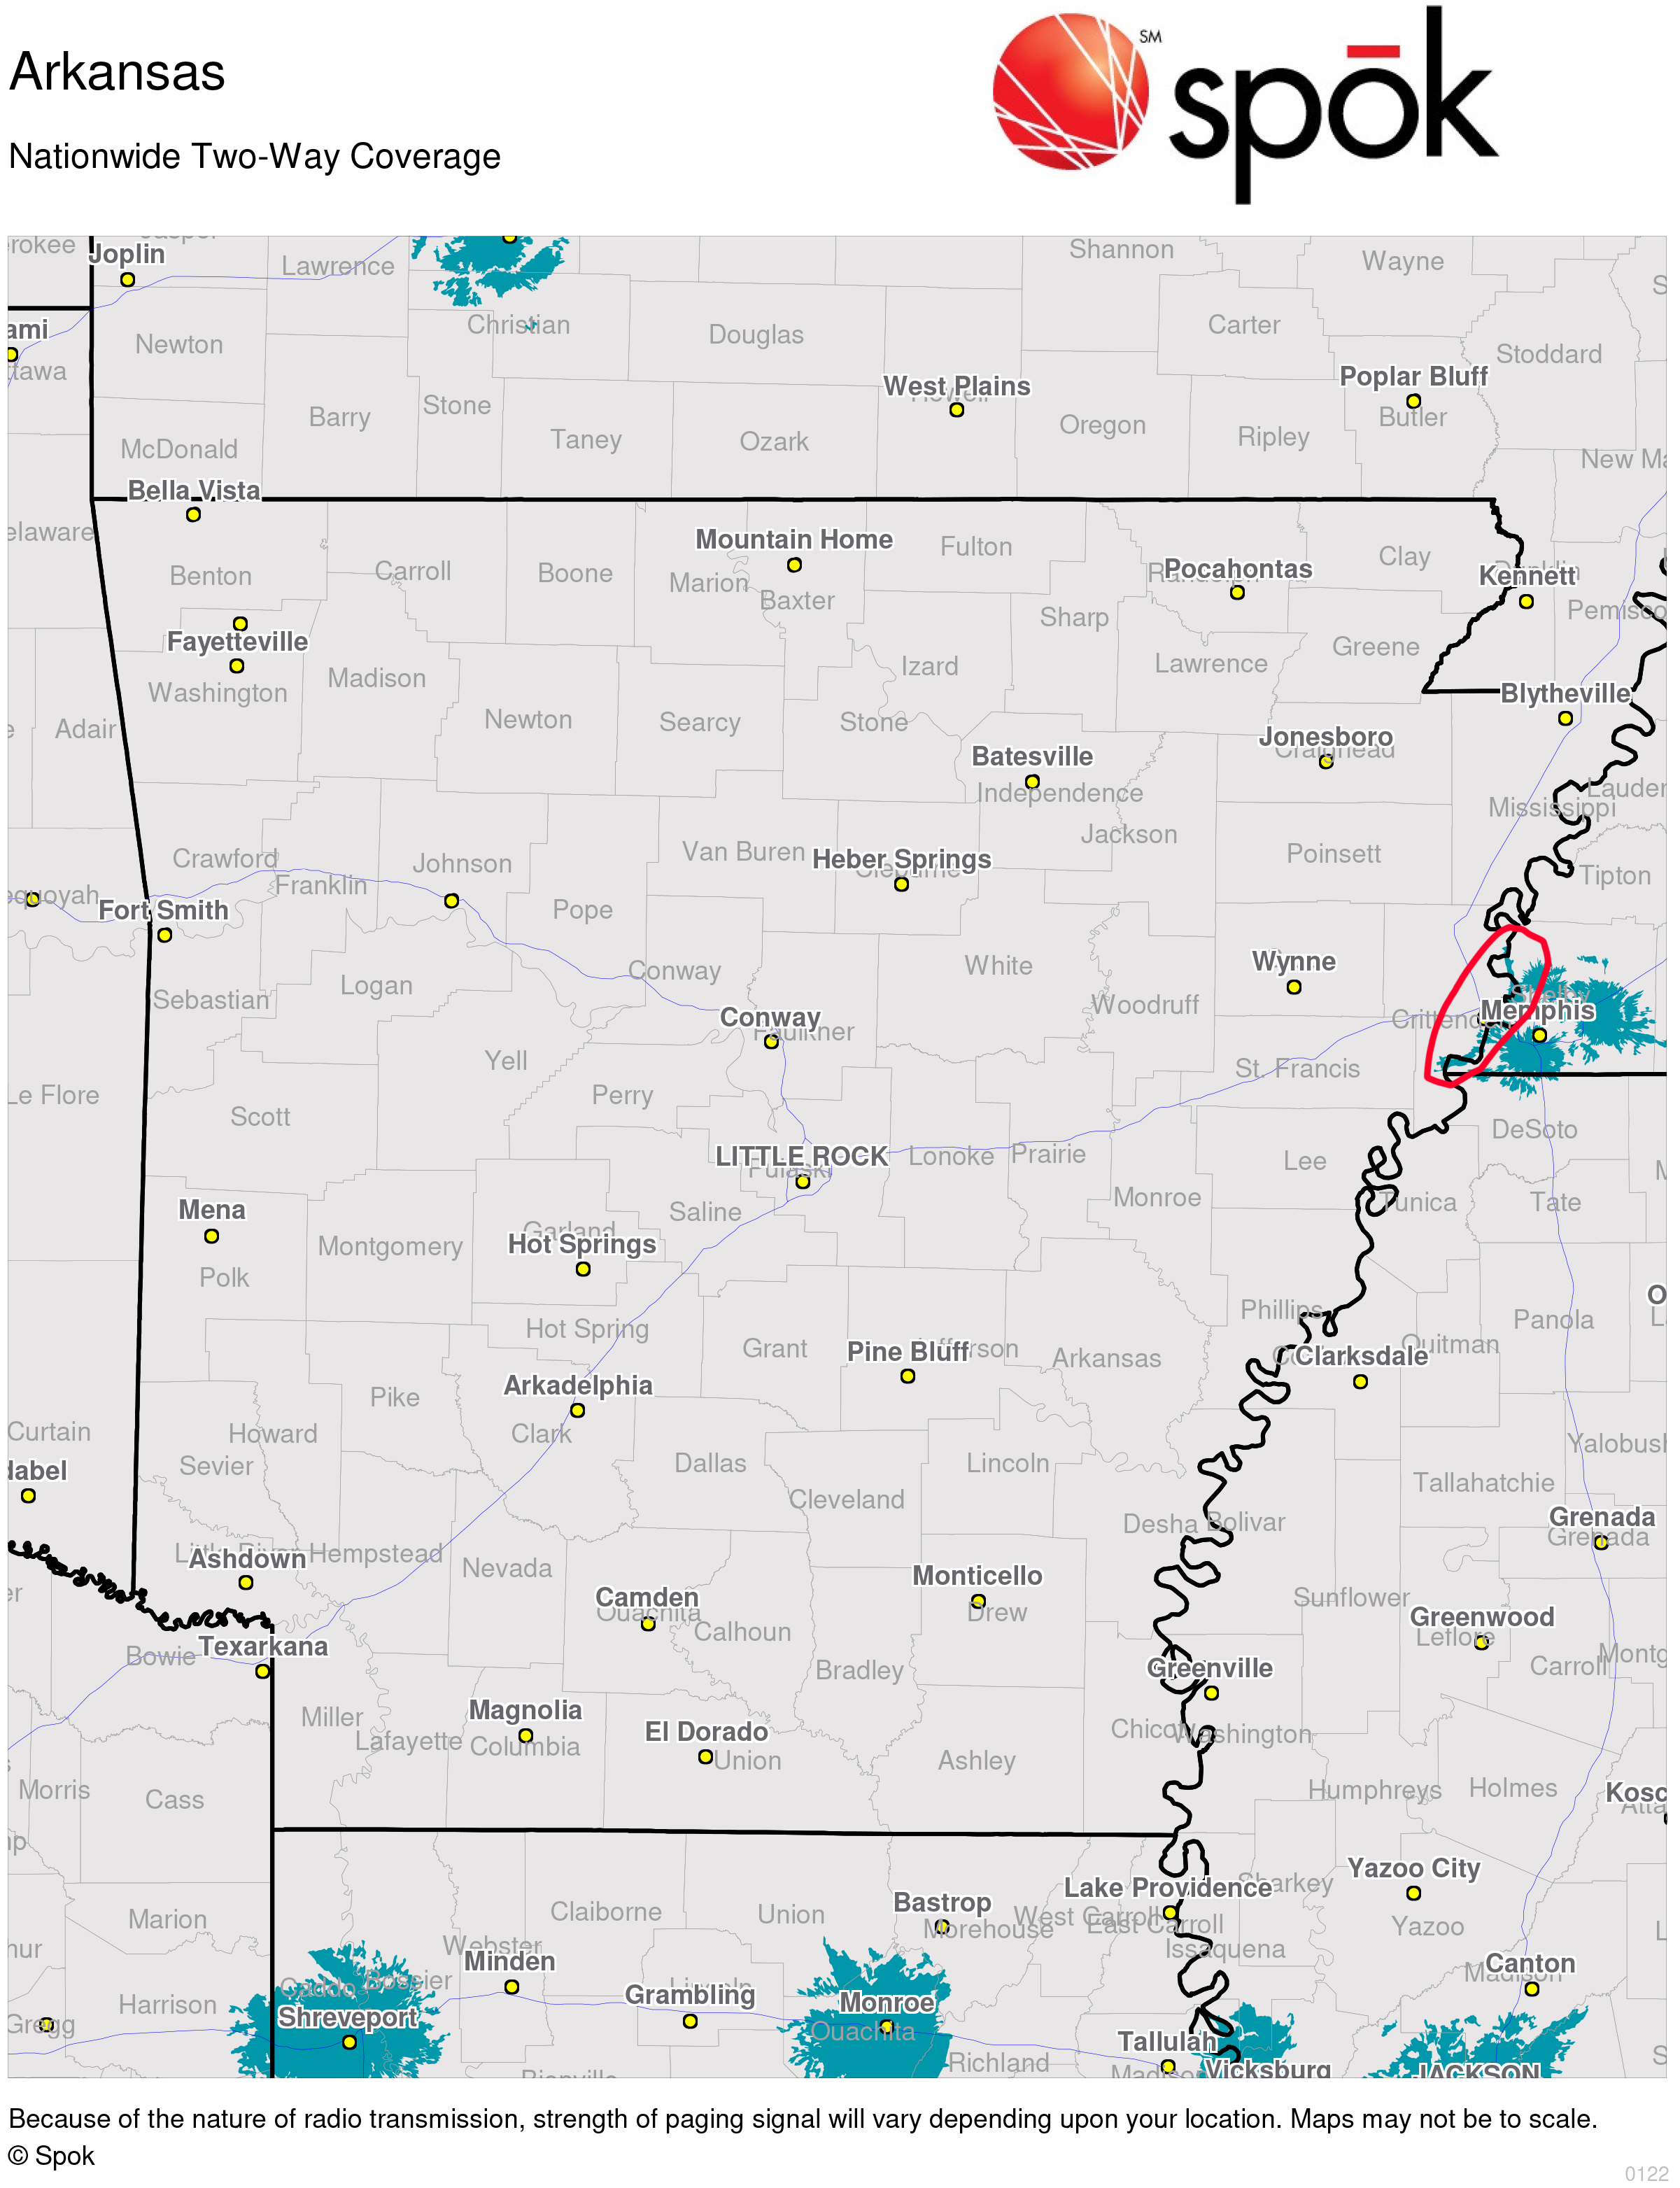 Arkansas Two-Way Pager Coverage Map. Copyright Spok, Inc